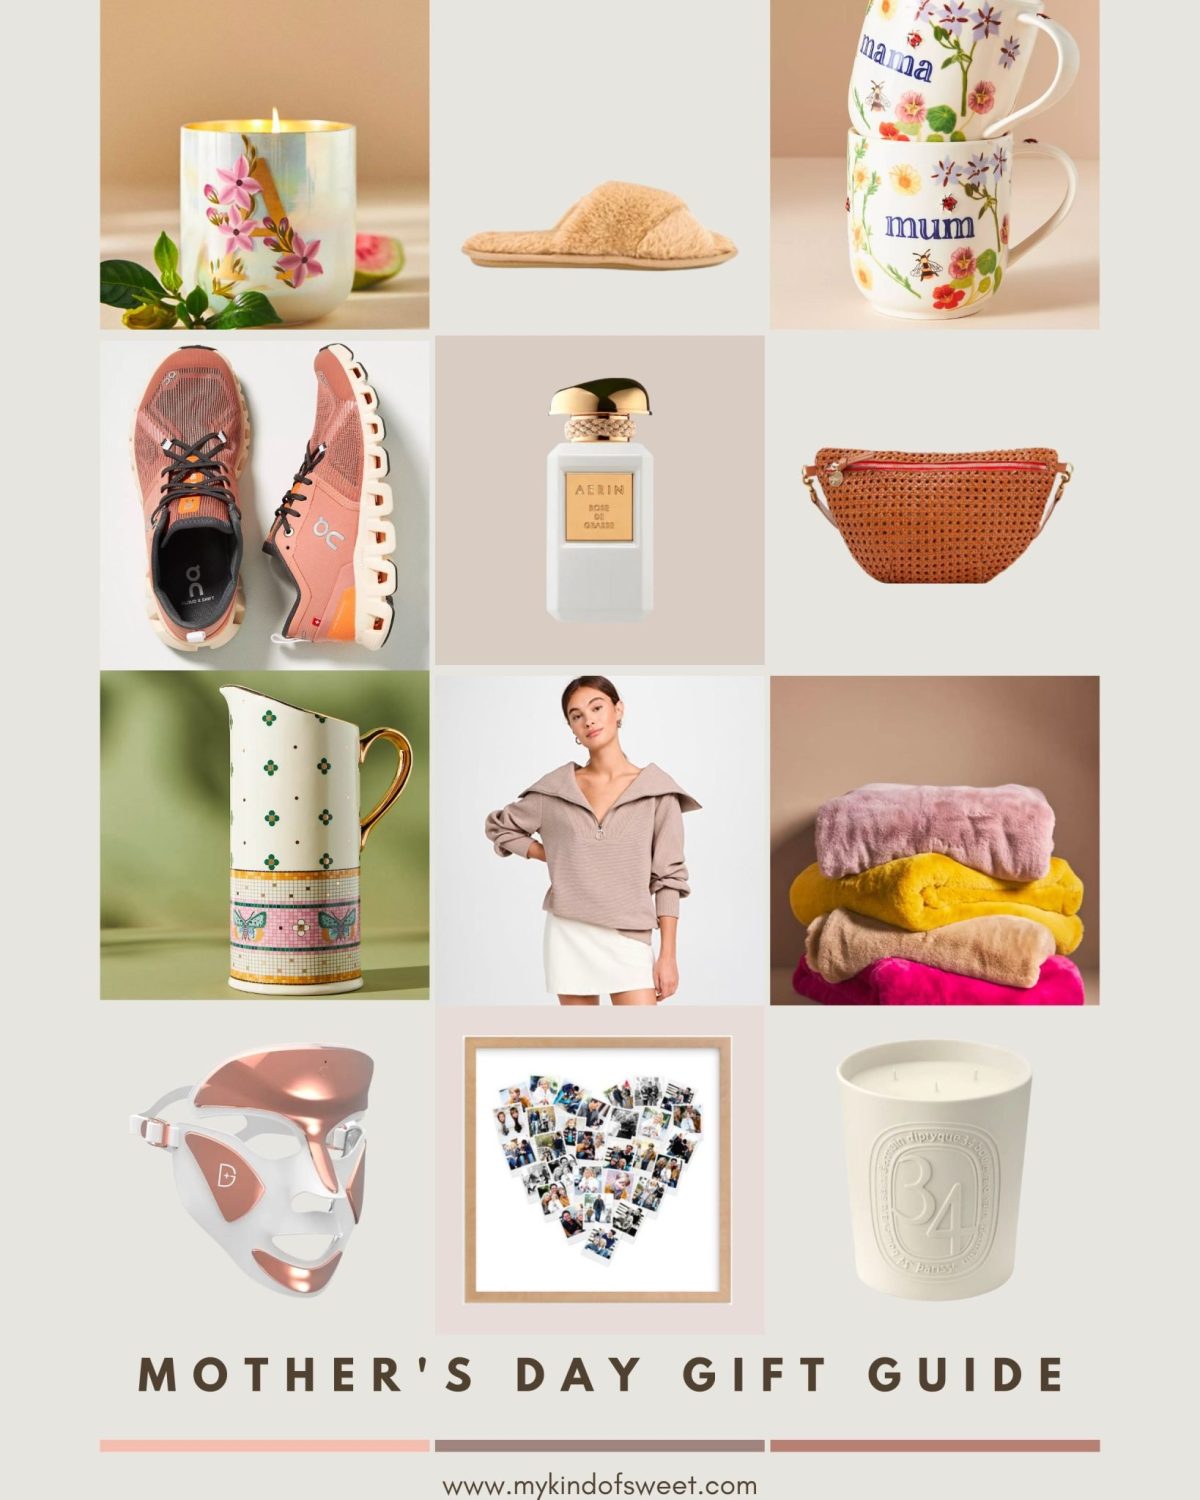 A Mother's Day gift guide